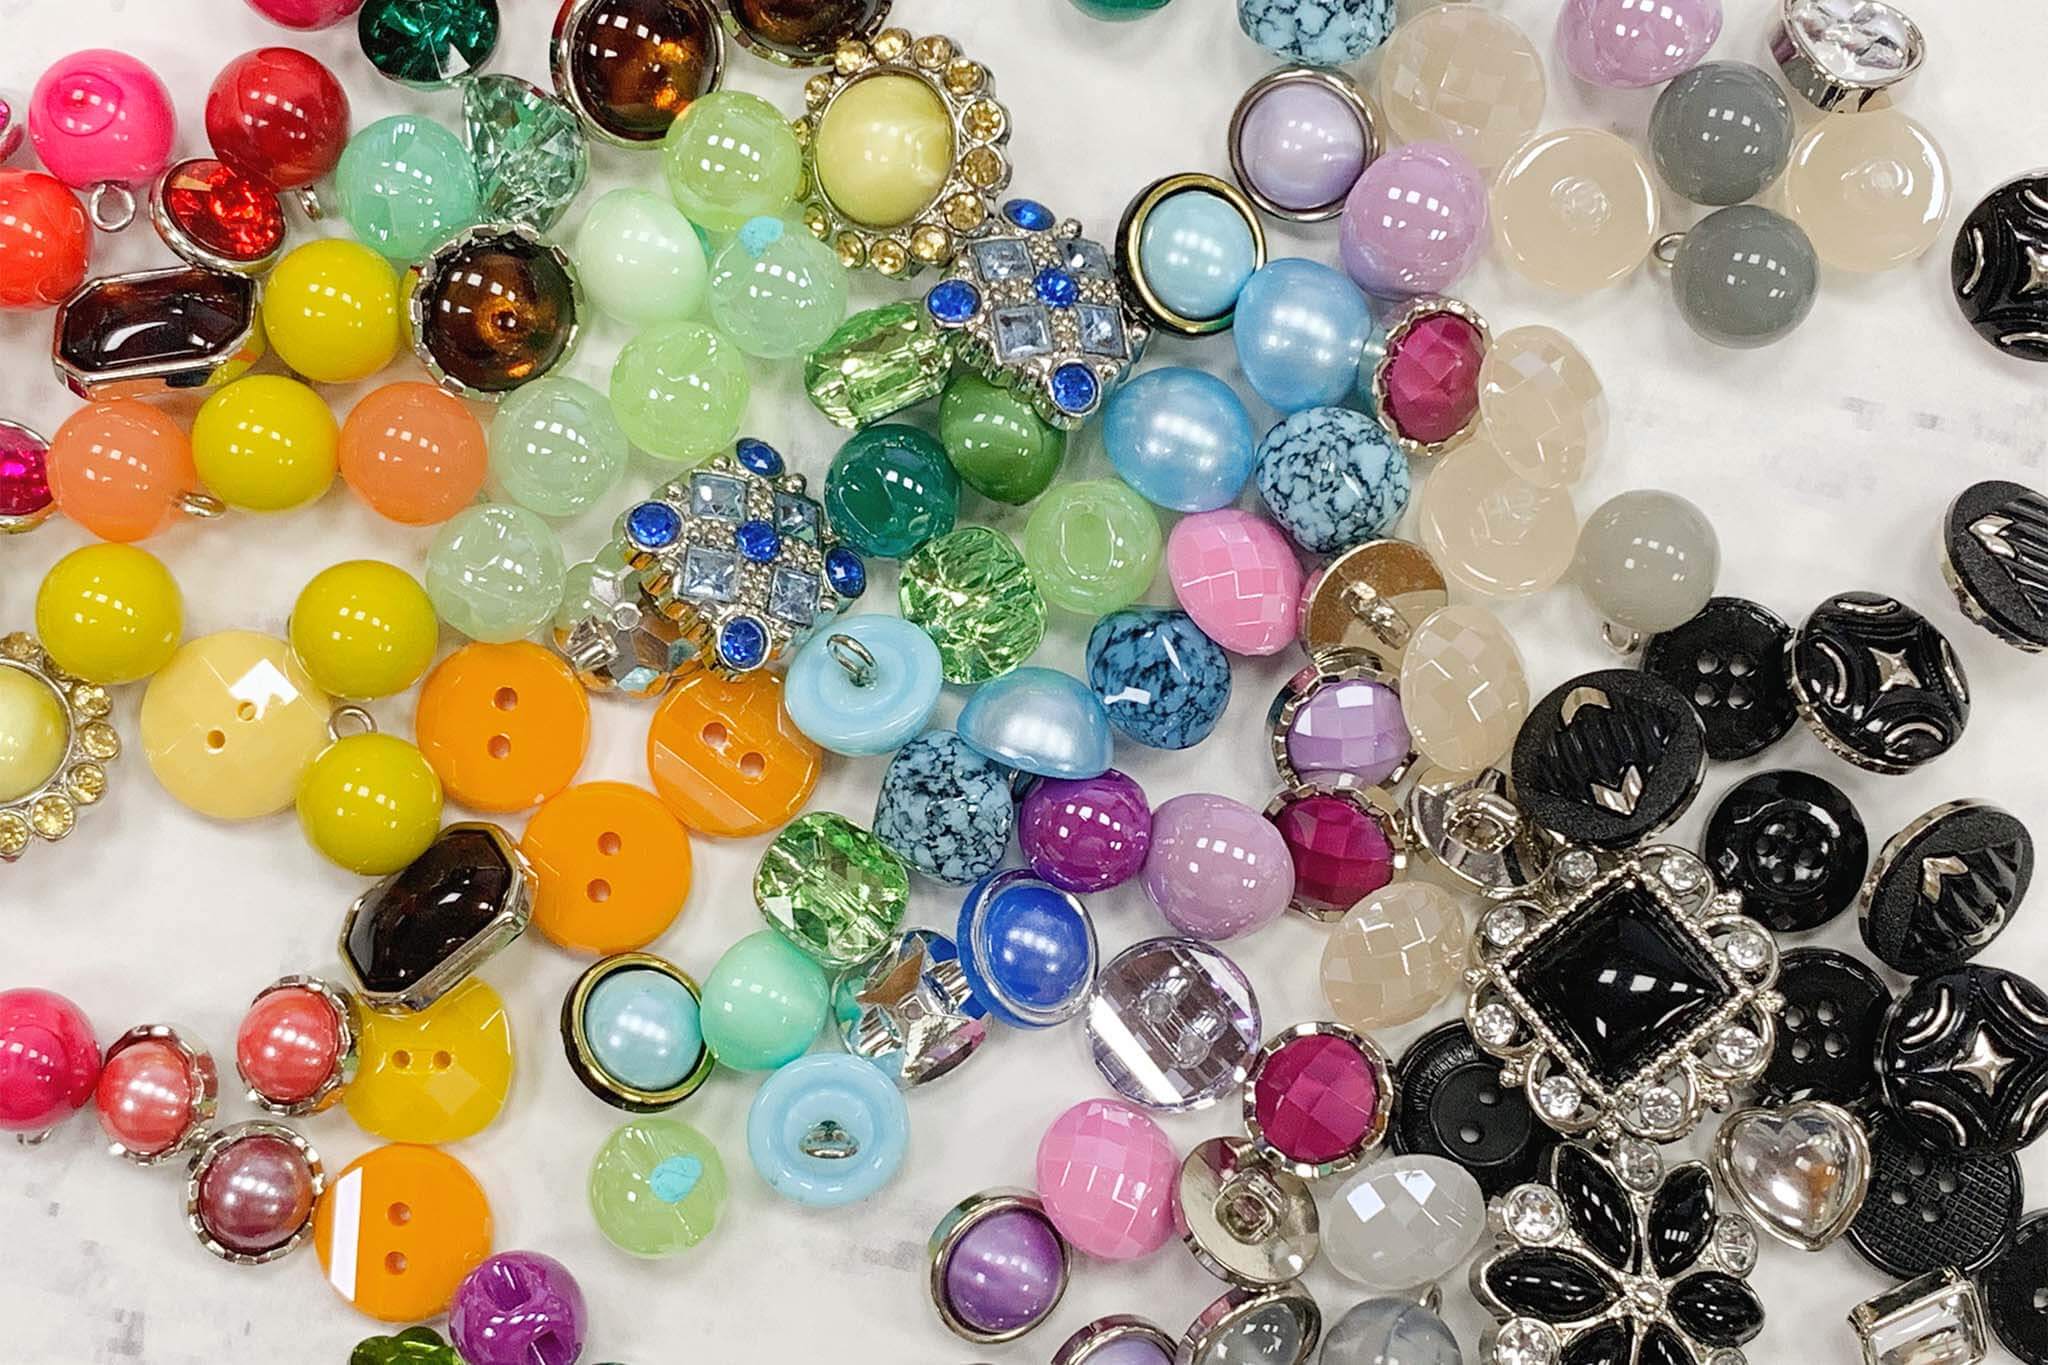 Different Types of Buttons by Name, Size, and Material.